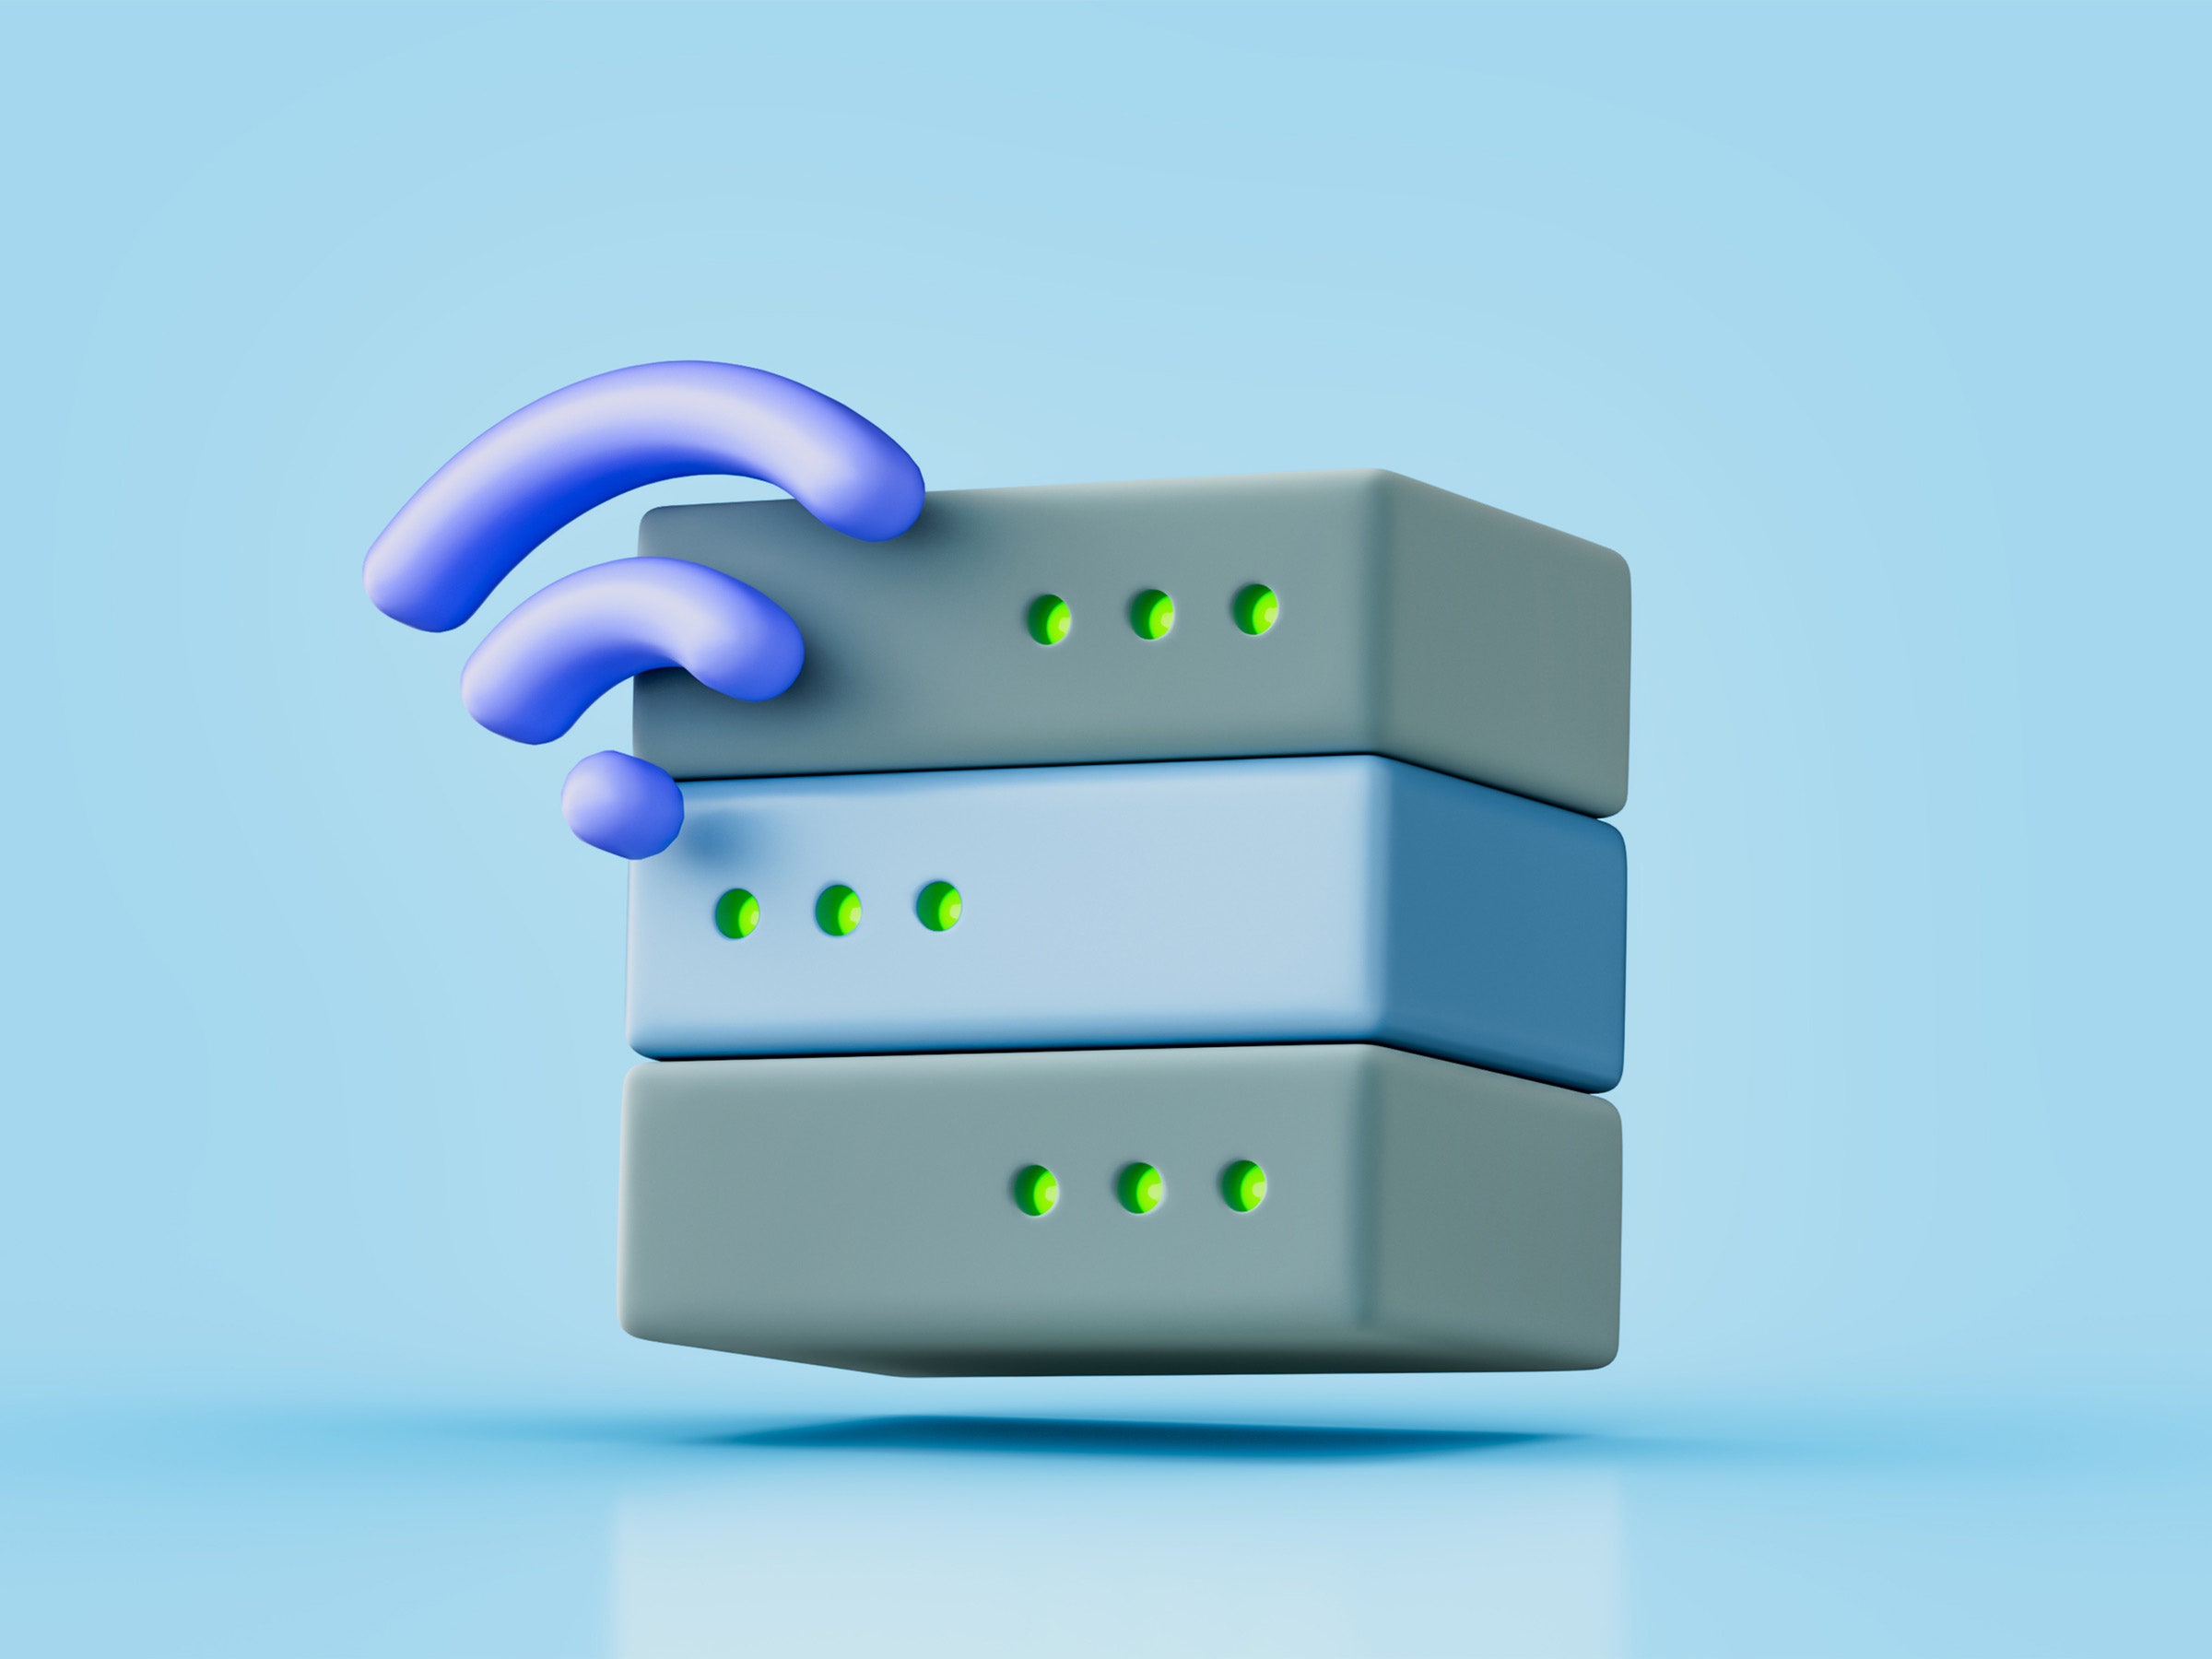 Ensure that you have a stable internet connection.
If using Wi-Fi, try switching to a wired connection for a more stable connection.